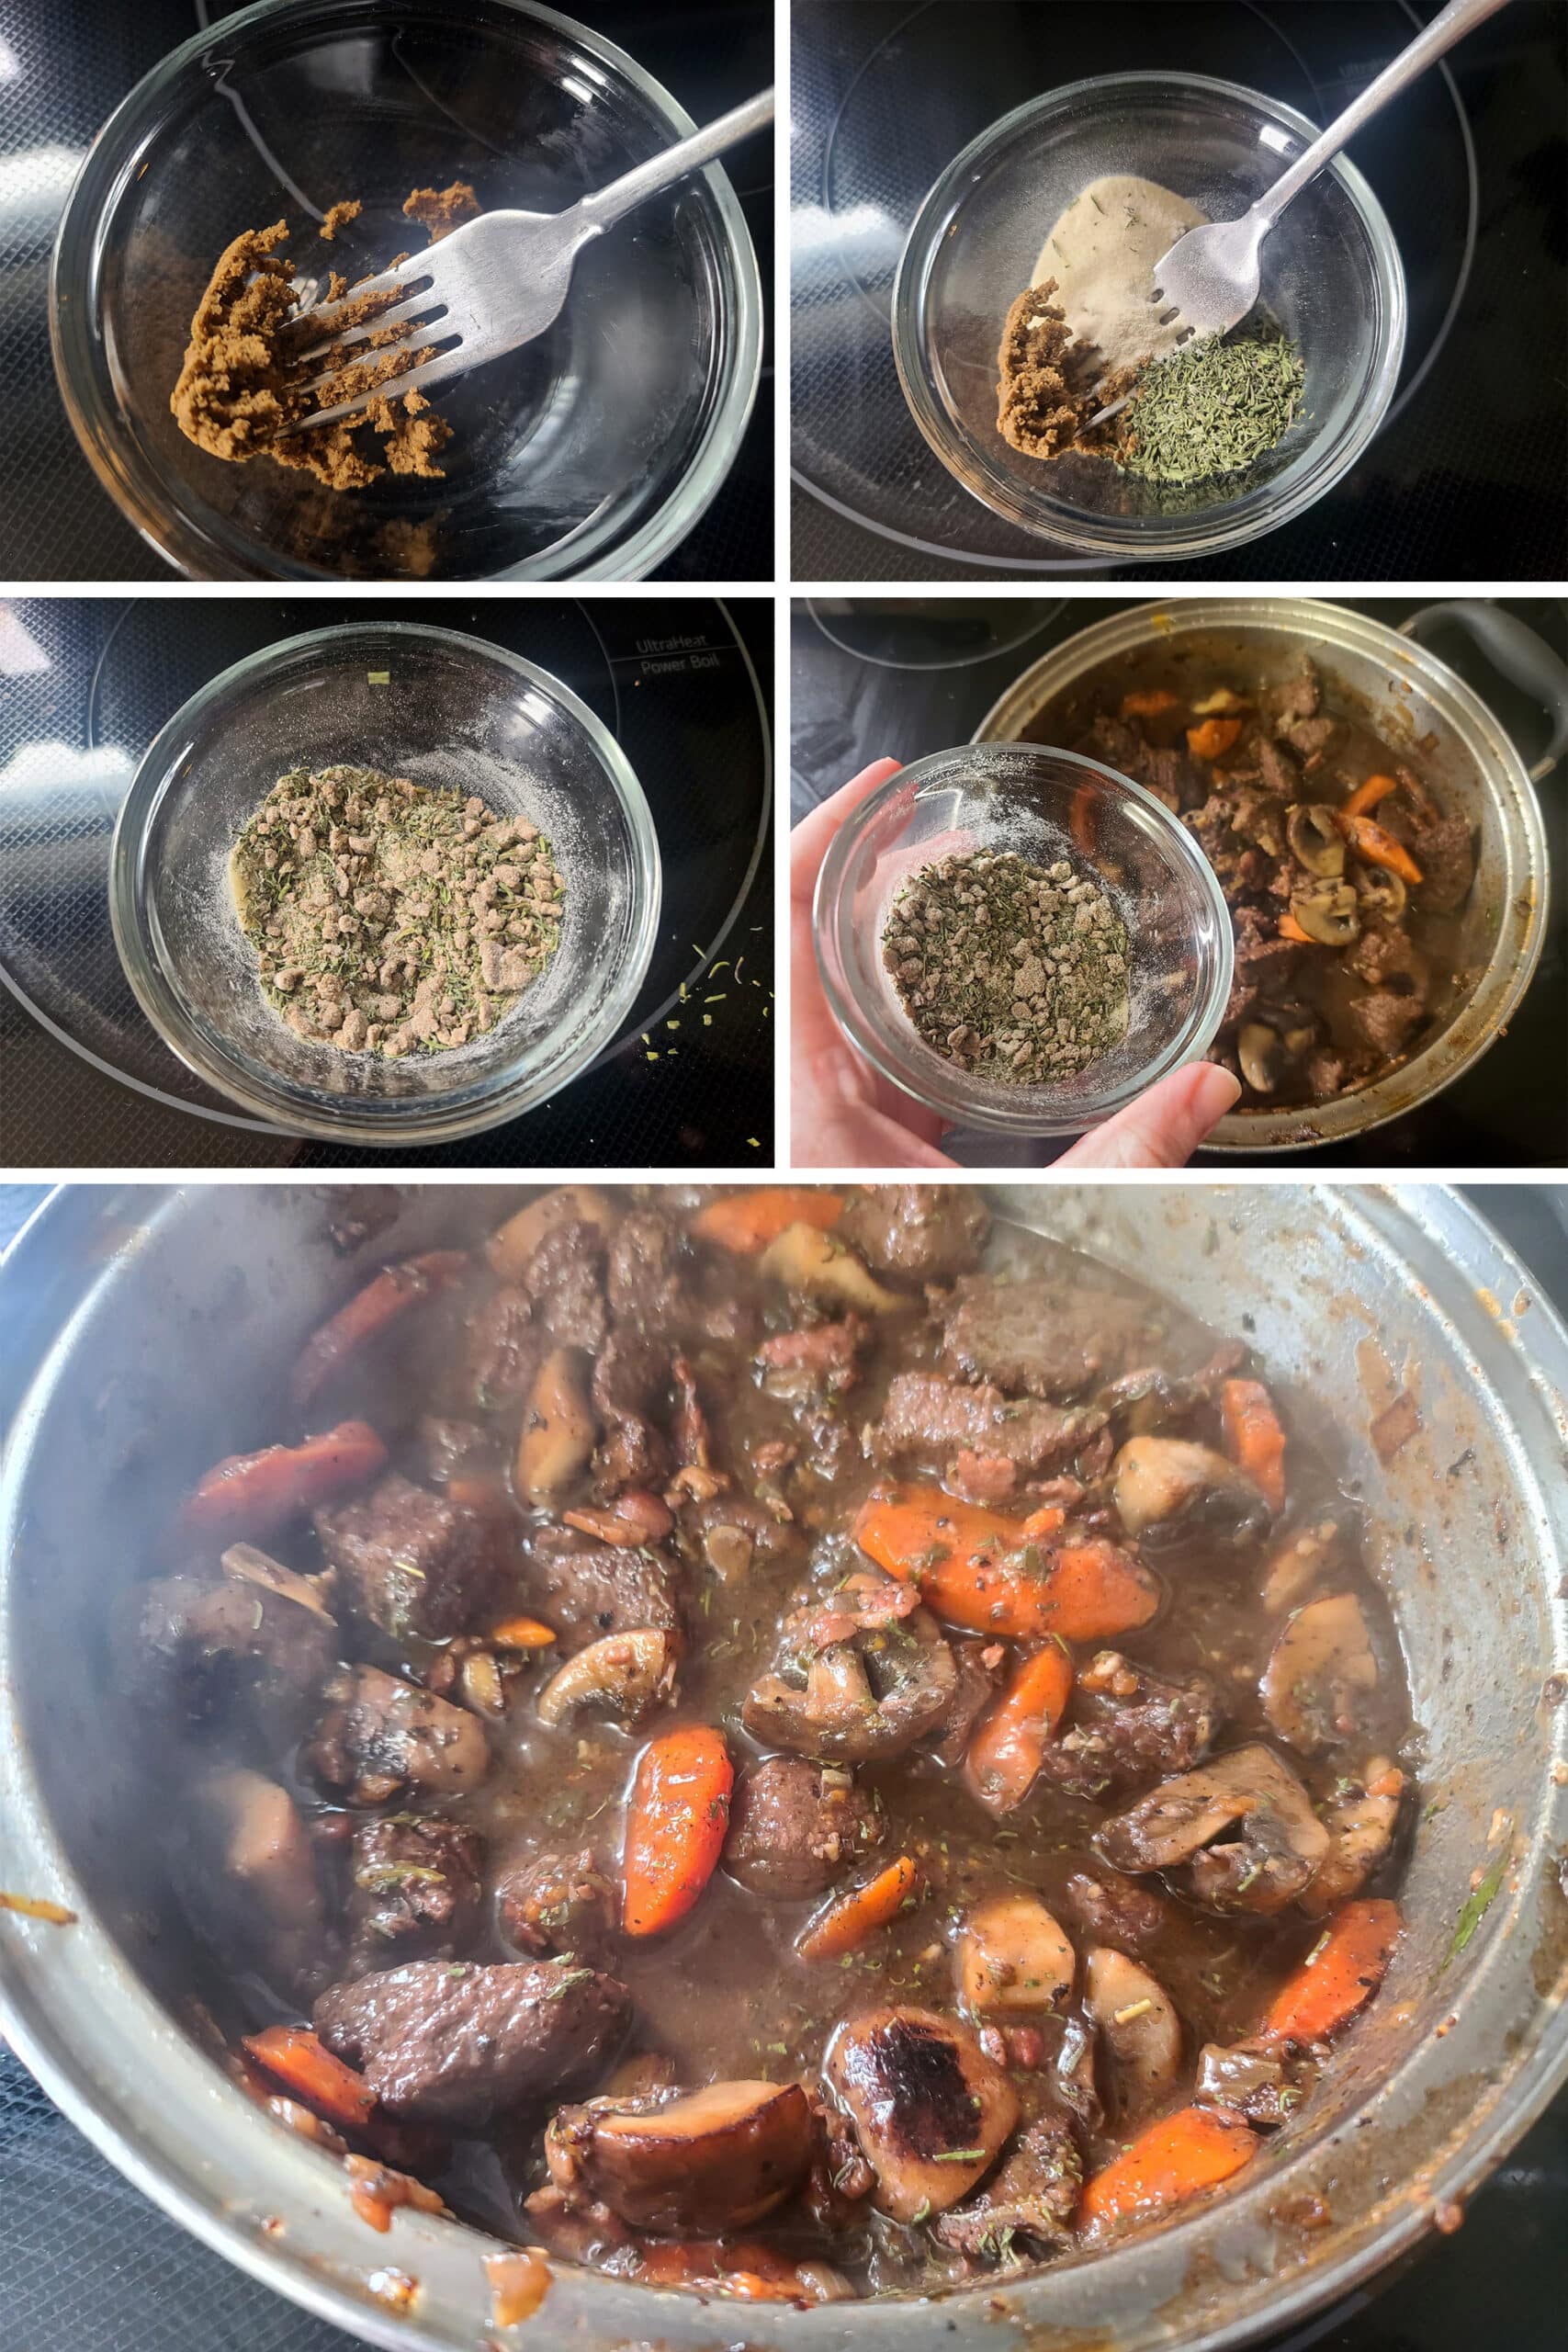 A 5 part image showing the bouillon, gelatin, xanthan gum, and savoury being mixed together and stirred into the stew.